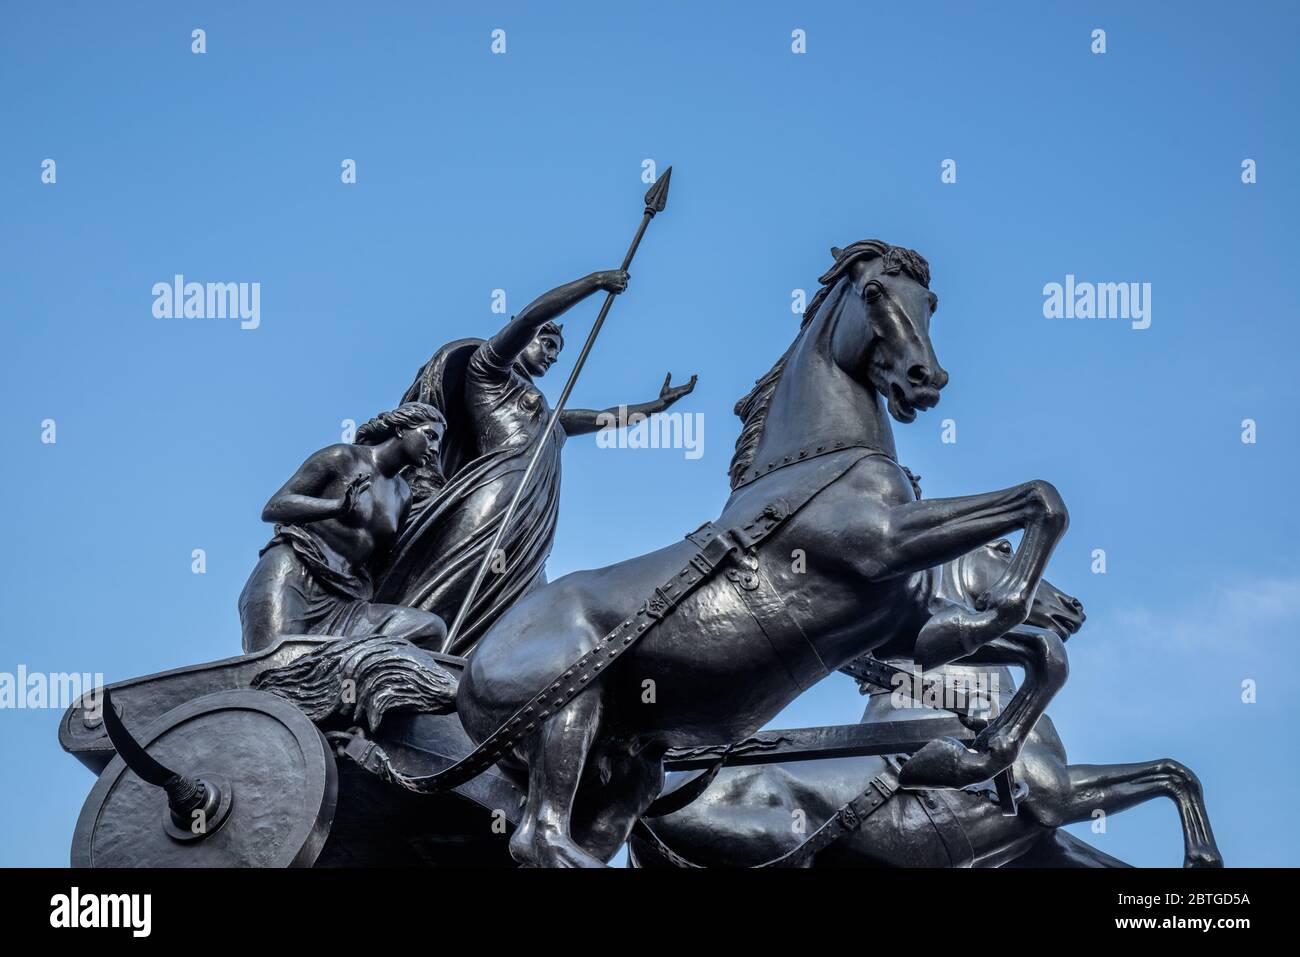 Bronze statue of Boudicca and her daughters riding a chariot pulled by two horses, Westminster Bridge, London, UK Stock Photo